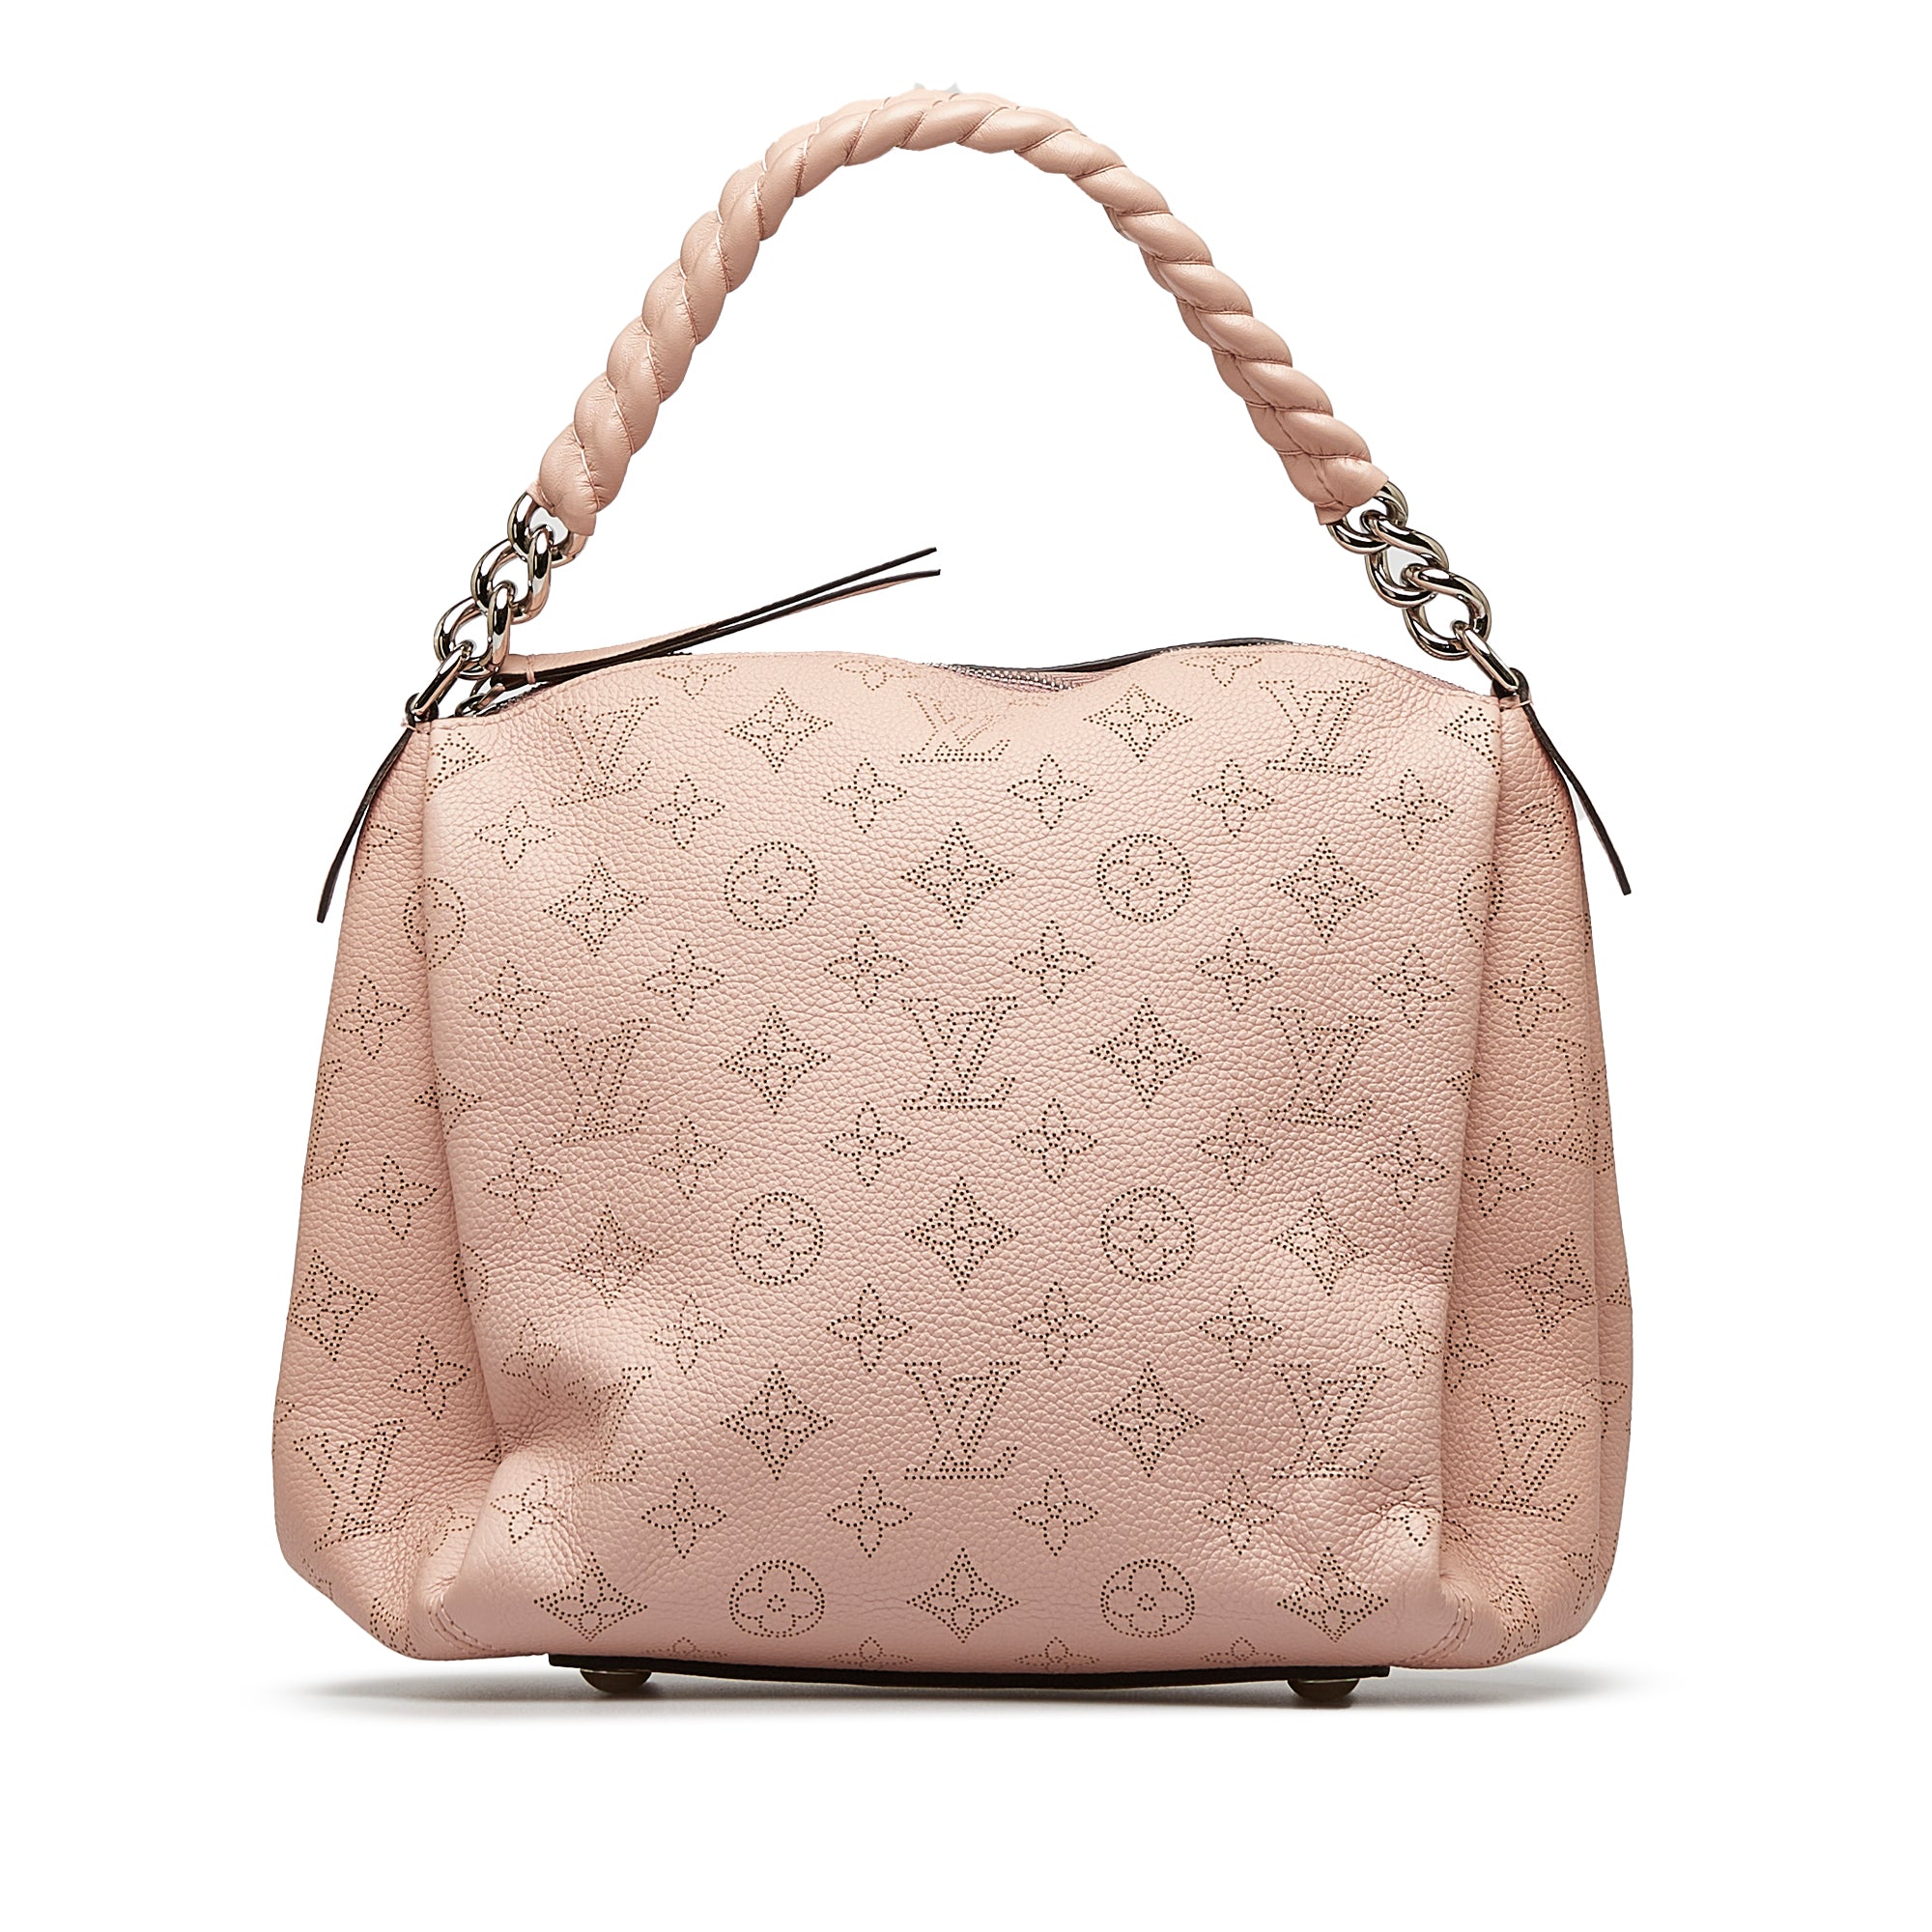 Explore Our Exciting Line of Louis Vuitton 2015 Pink Leather Mahina  Babylone Crossbody Bag Louis Vuitton . Unique Designs that You Won't See  Anywhere Else